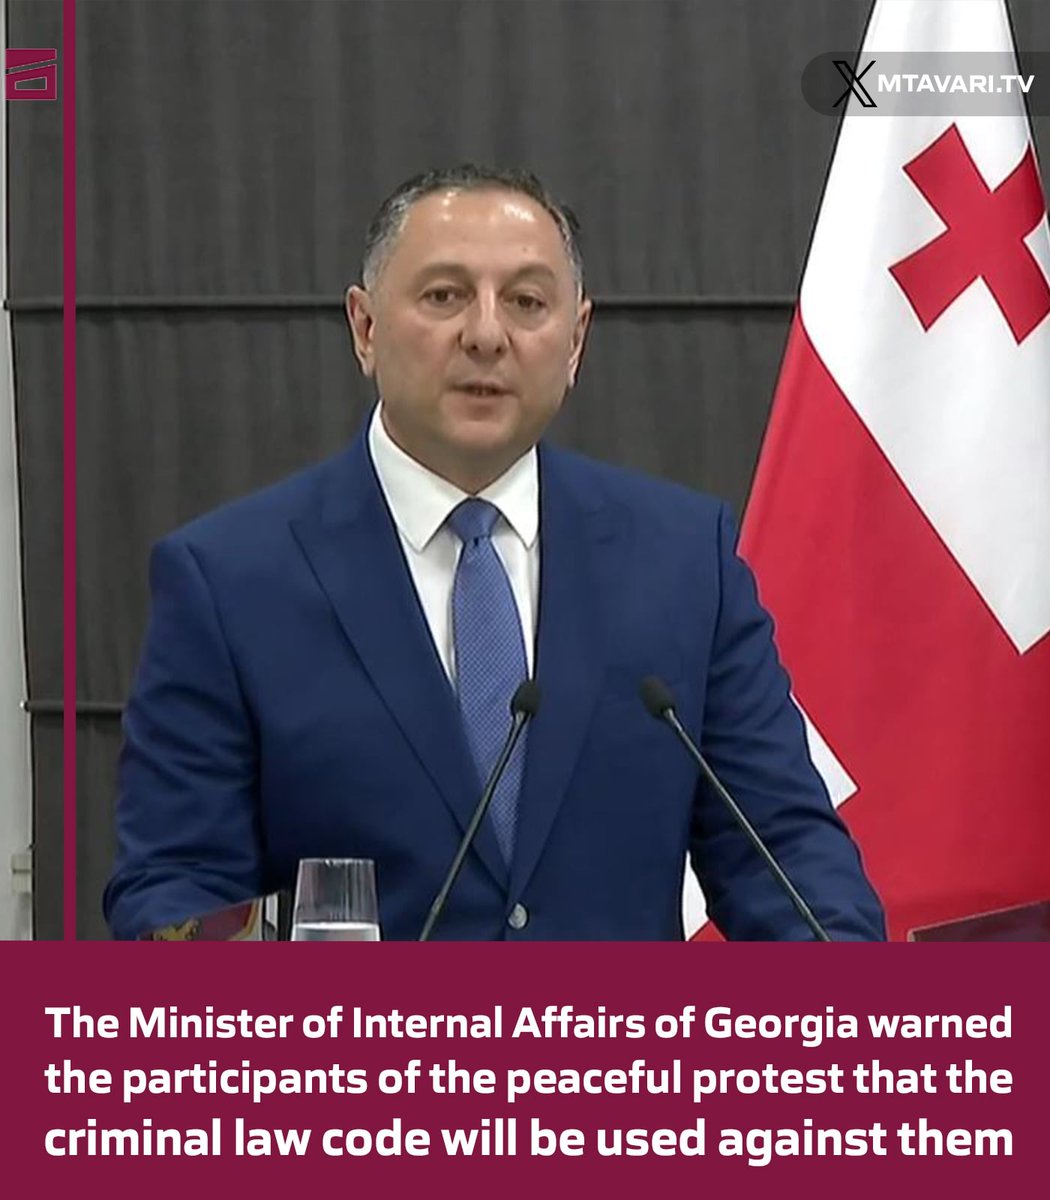 At a special briefing, the Minister of Internal Affairs of #Georgia warned the participants of the protest that the criminal law code will be used against them, and they will be imprisoned for 4 years. Today, citizens are going to spend the night in front of the Parliament.